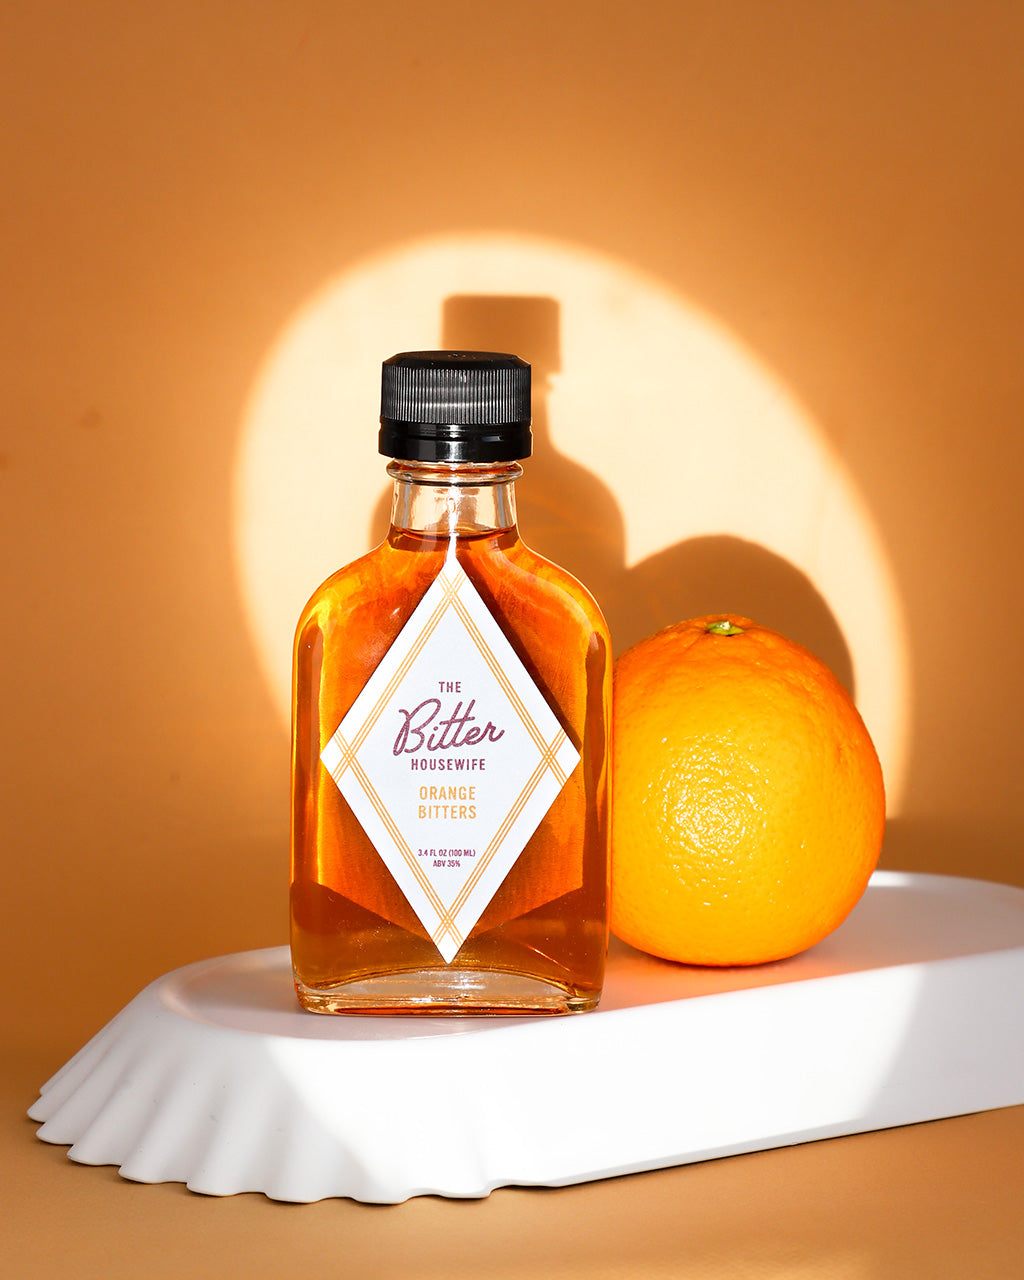 Why Our Orange Bitters Are The Best!